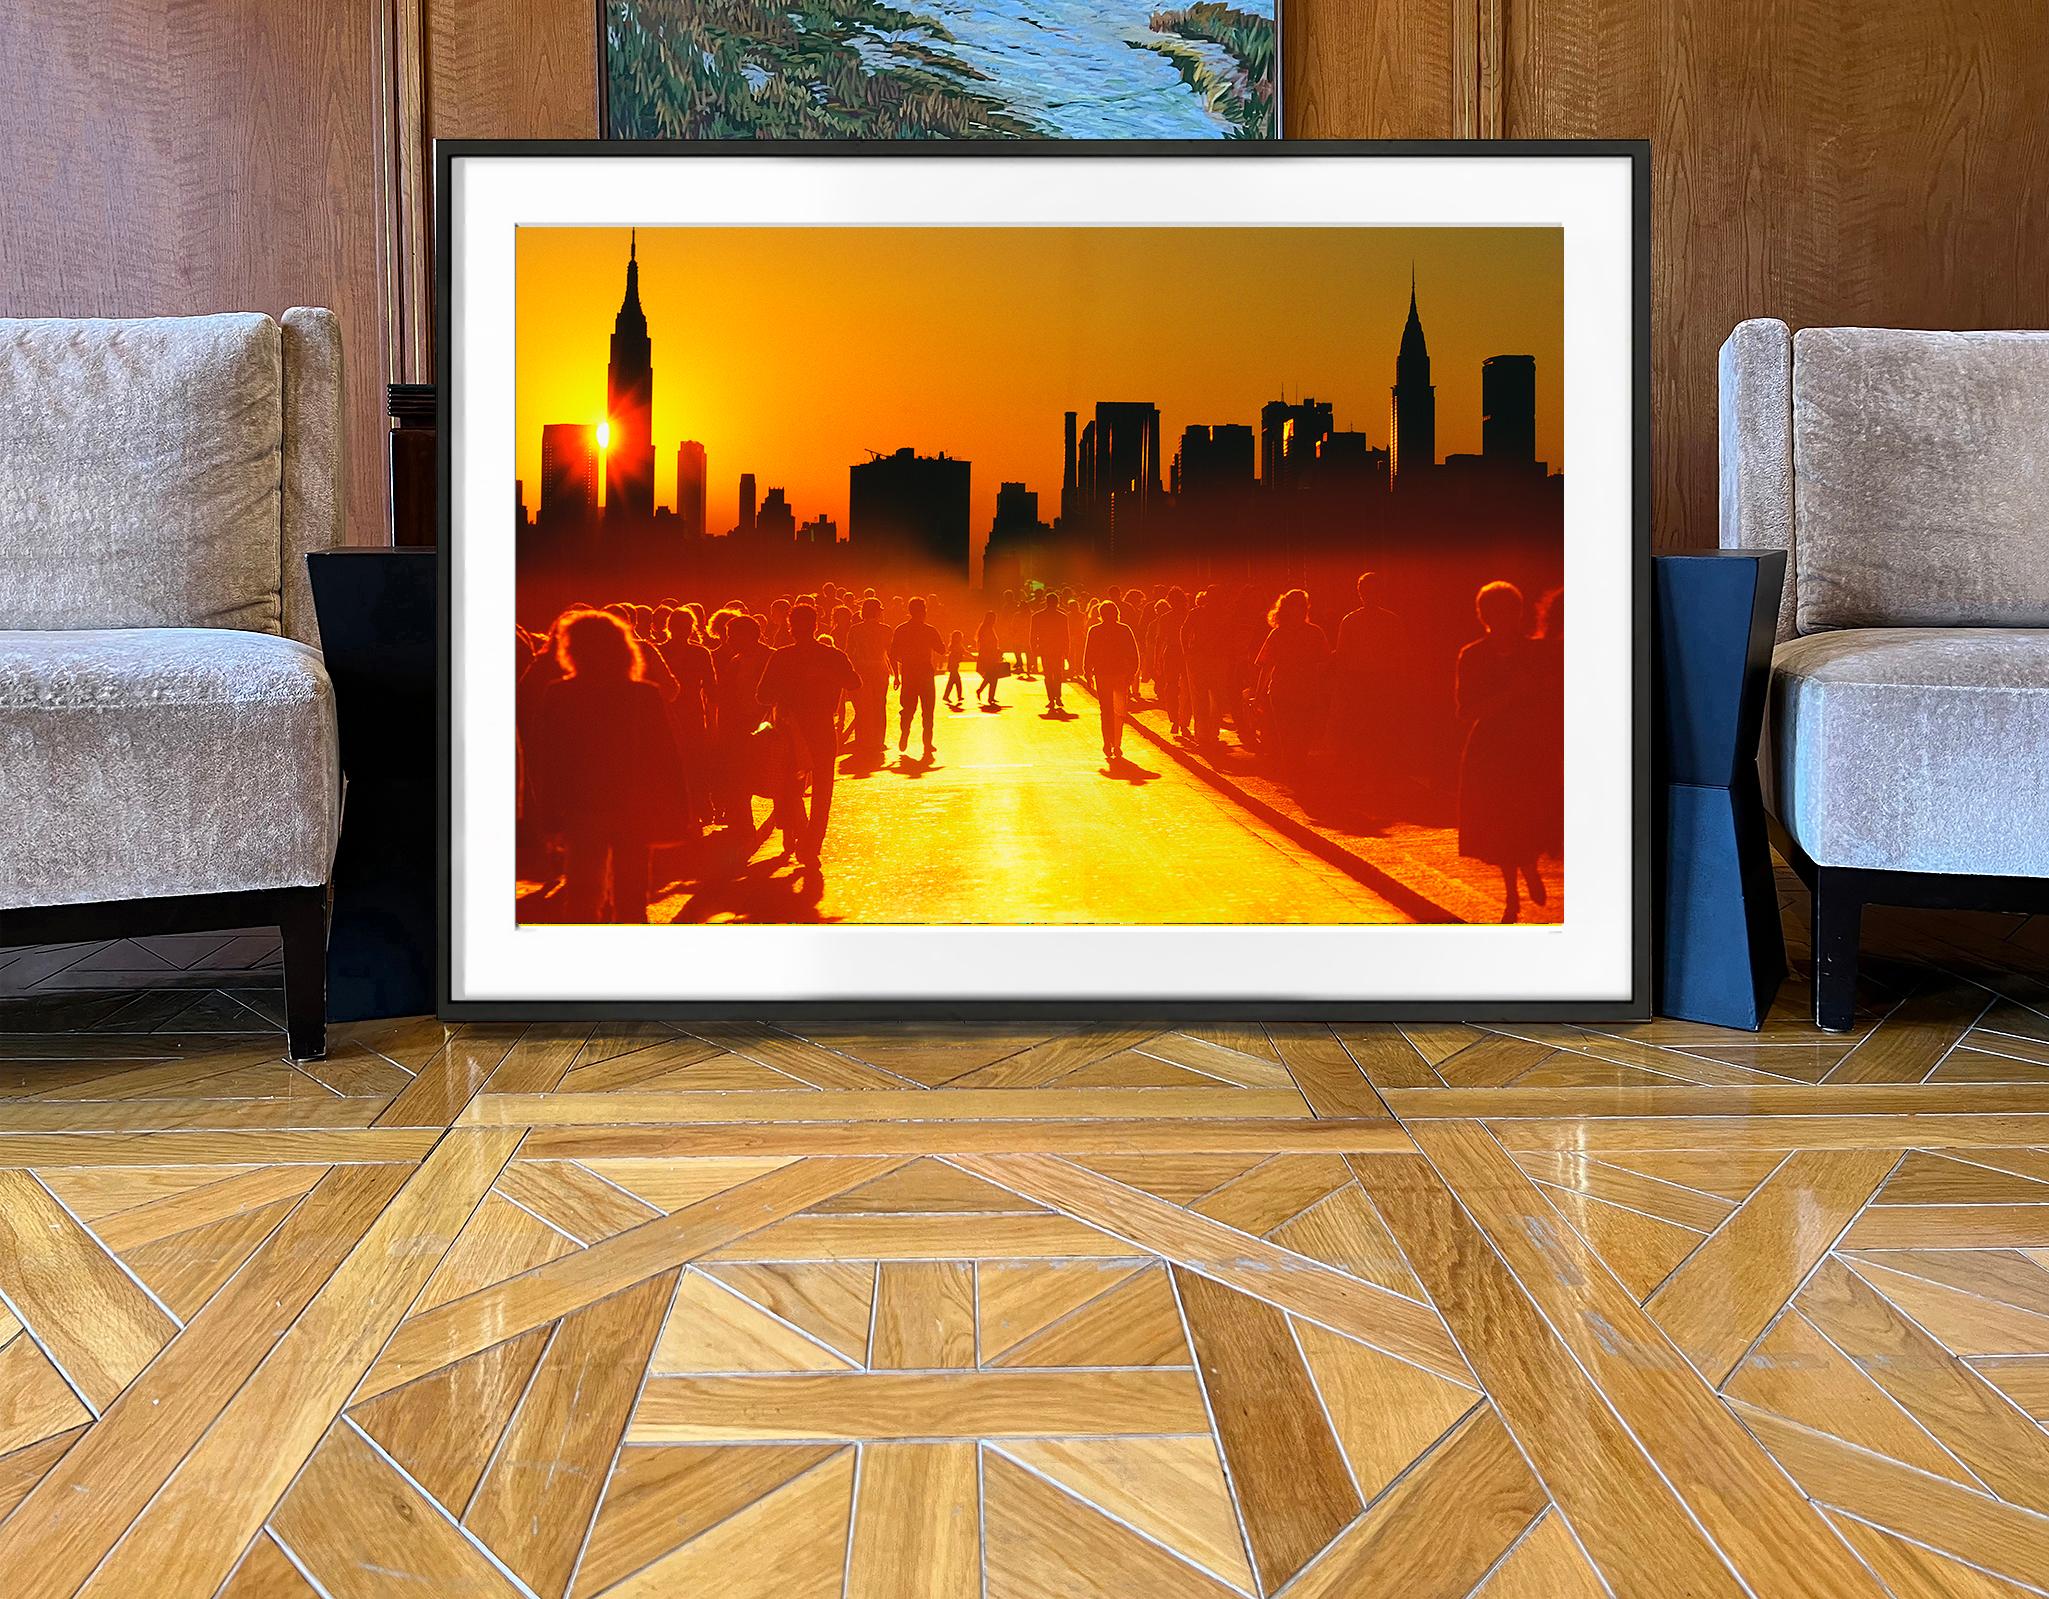 Sci Fi Close Encounters with Orange New York City - Conceptual Photograph by Mitchell Funk